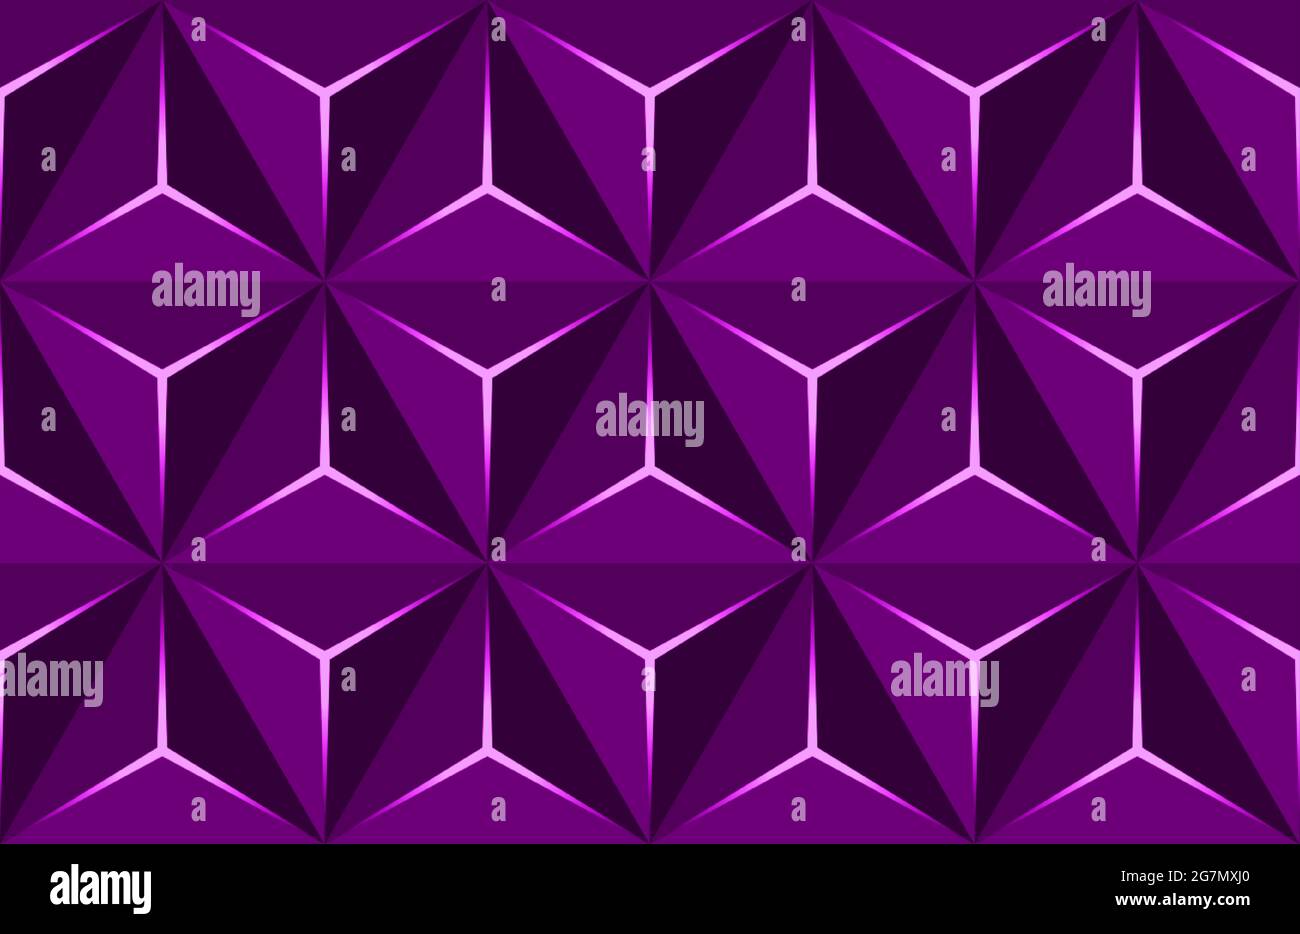 Geometric 3d Pattern With Basic Shapes Purple Background With Luxury